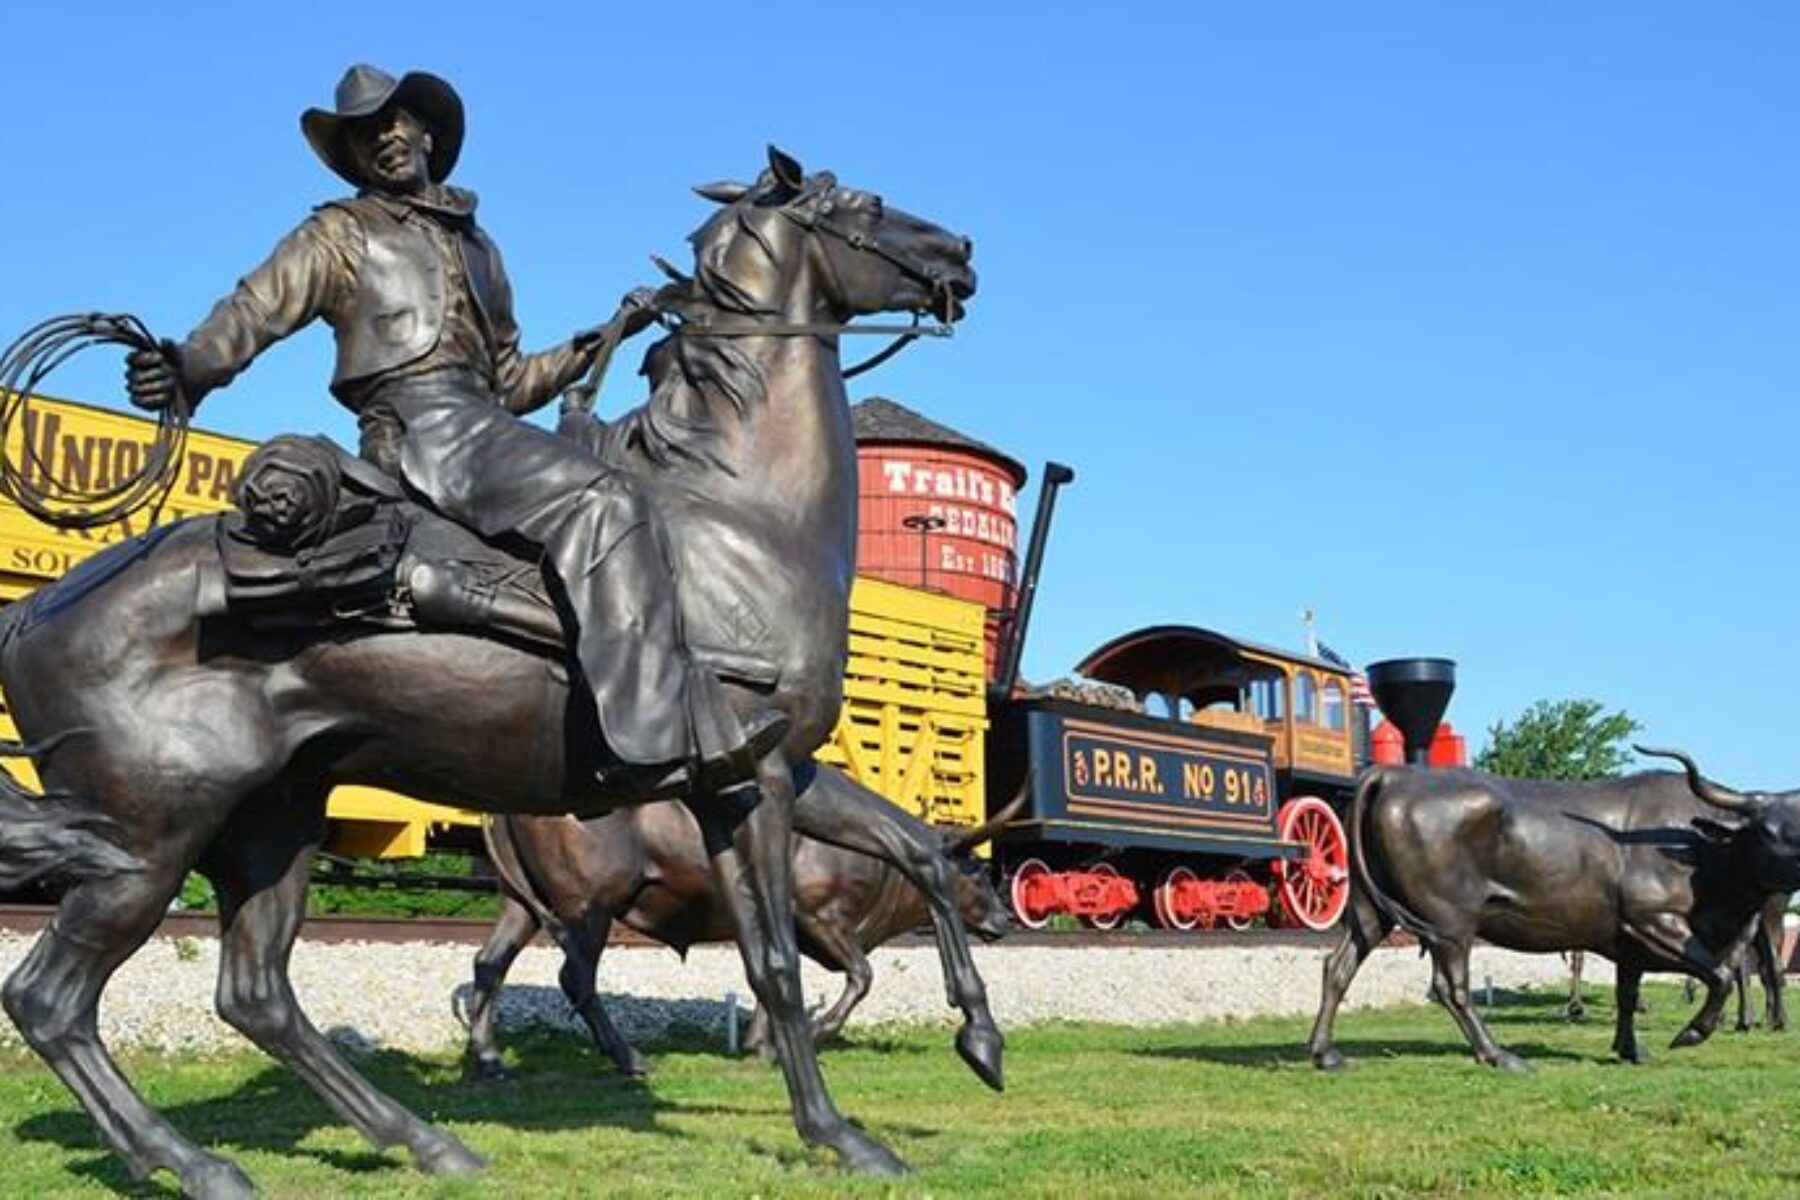 Trail's End Monument in Sedalia, 35 miles east of the Katy Trail's western end in Clinton, celebrating Sedalia's history as the first cow town | Photo by Danielle Taylor